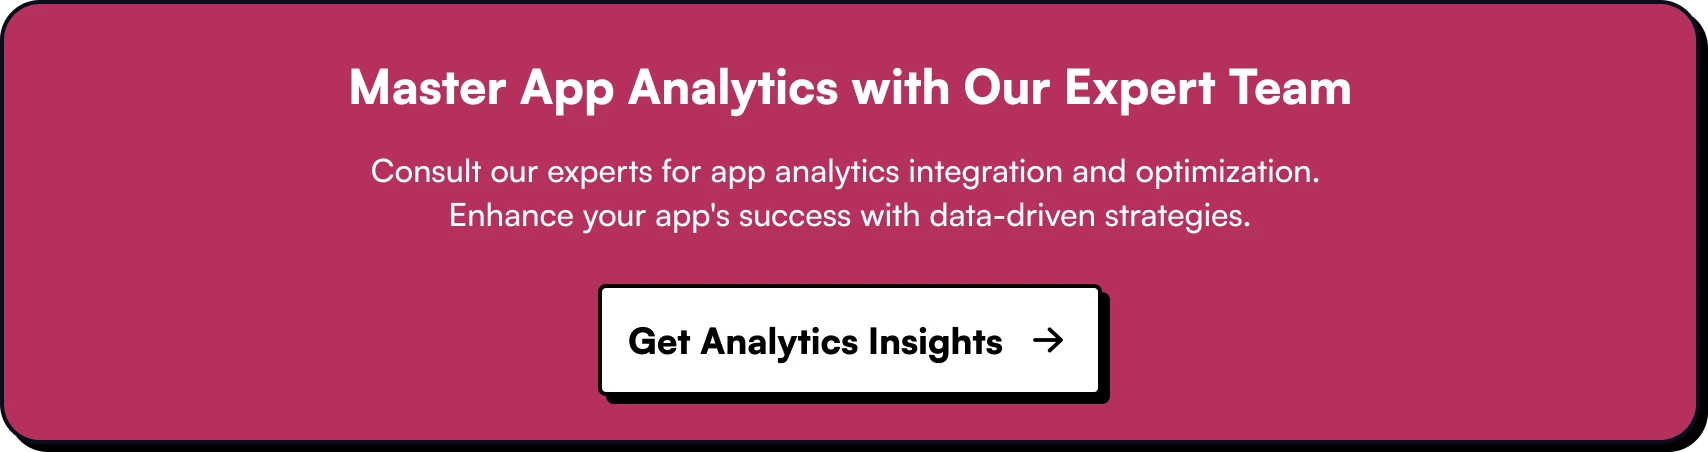 Enhance your app's success with App Analytics and data-driven strategies